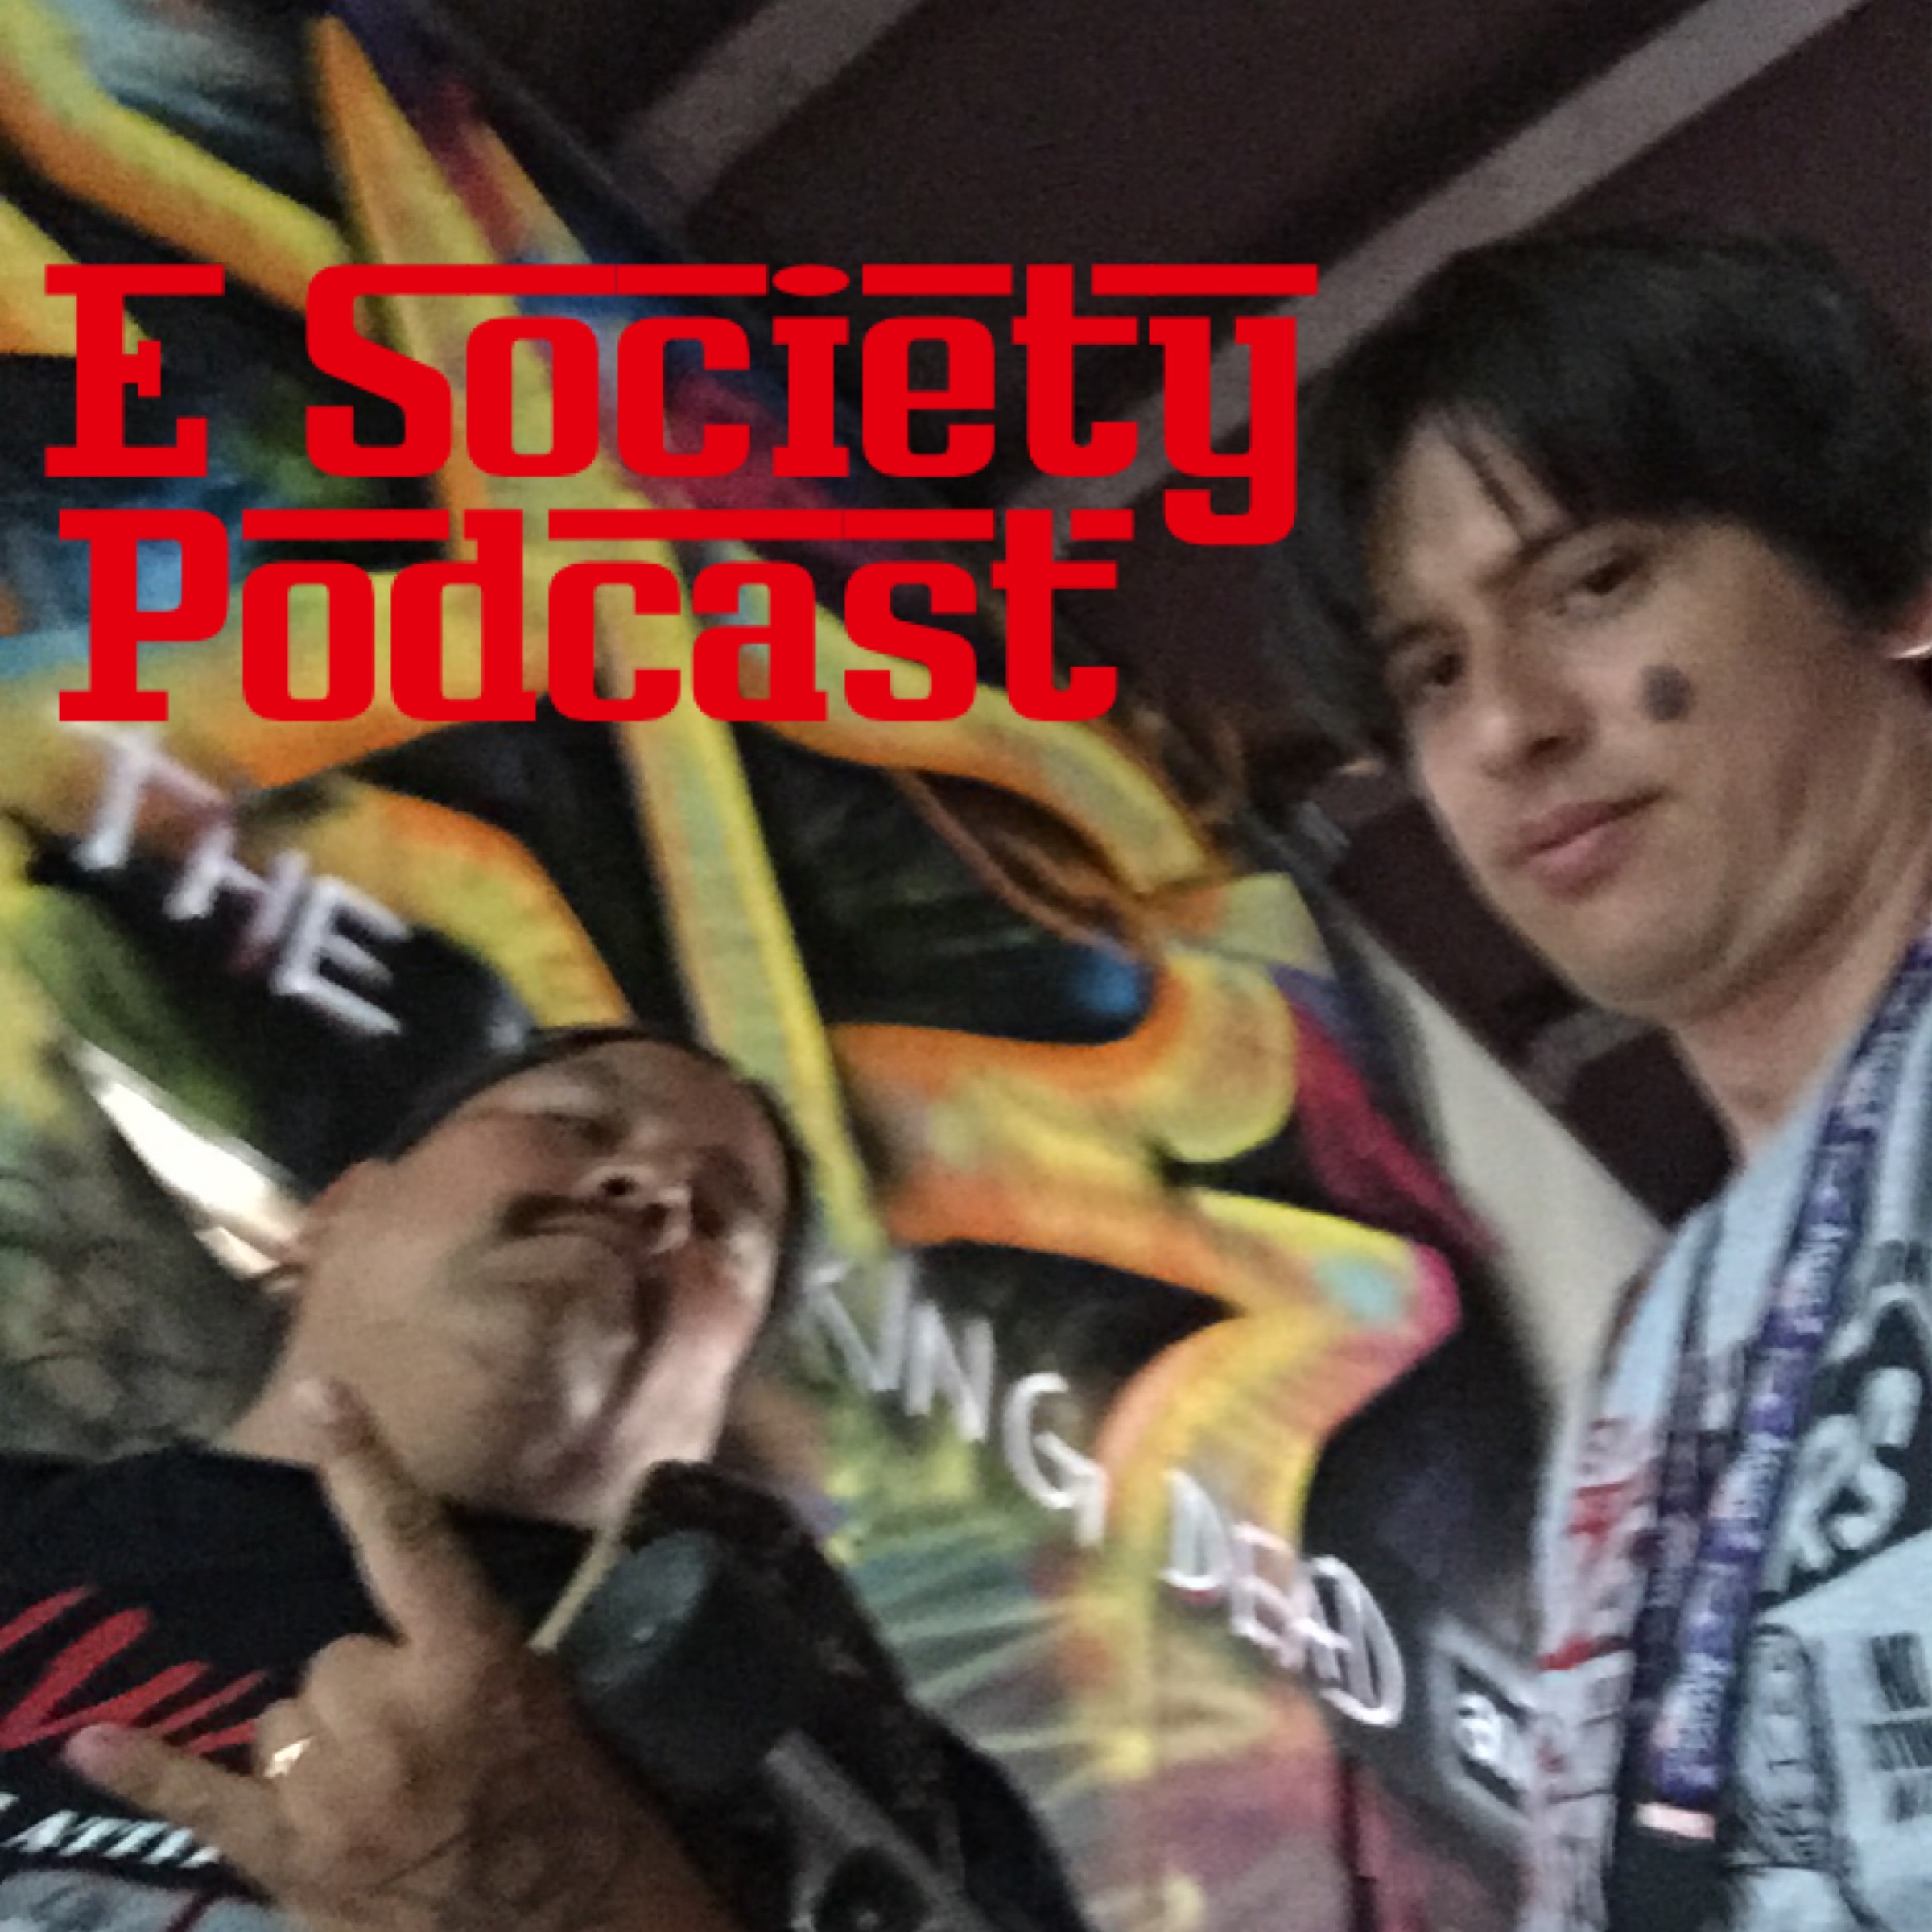 E Society Podcast - Ep. 76: Sorry for the delay